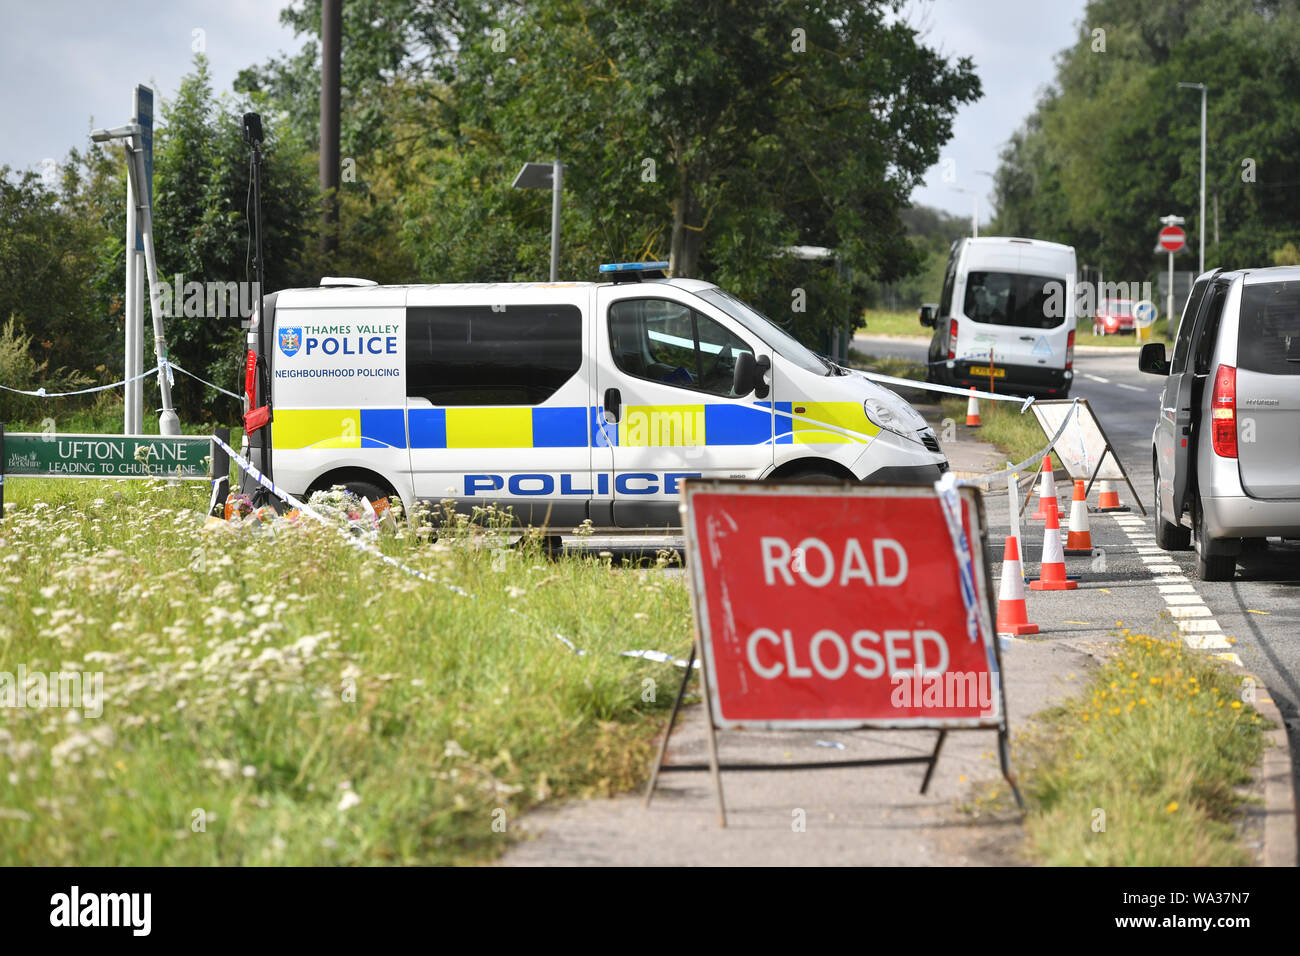 Police officers remain at the scene on Ufton Lane, near Sulhamstead, Berkshire, where Thames Valley Police officer Pc Andrew Harper, 28, died following a 'serious incident' at about 11.30pm on Thursday near the A4 Bath Road, between Reading and Newbury, at the village of Sulhamstead in Berkshire. Stock Photo